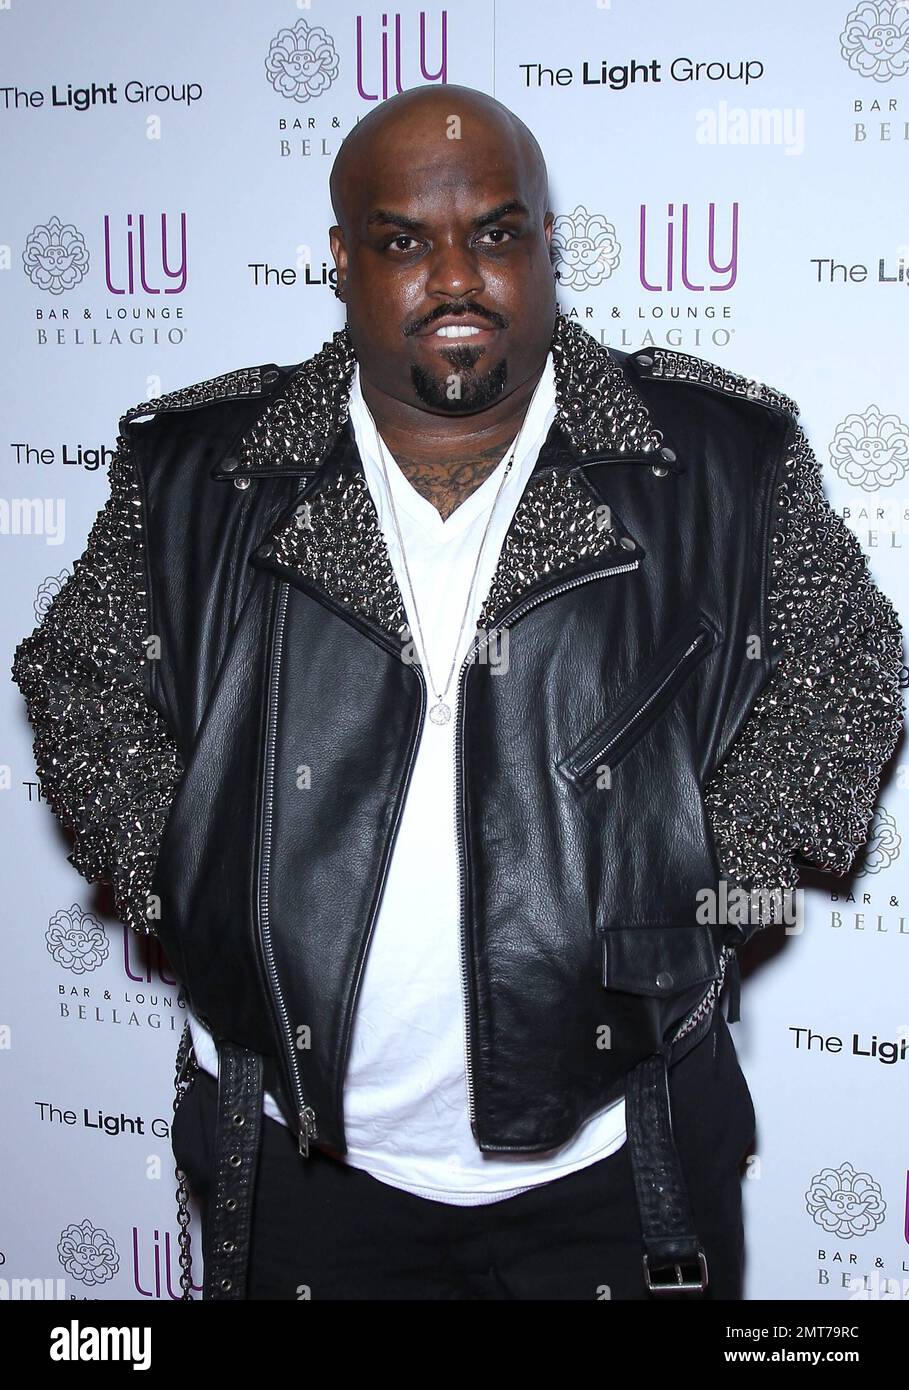 Cee Lo Green at the Grand Opening of Lily Bar & Lounge inside the Bellagio Resort & Casino. Las Vegas, NV. 18th February 2012. Stock Photo